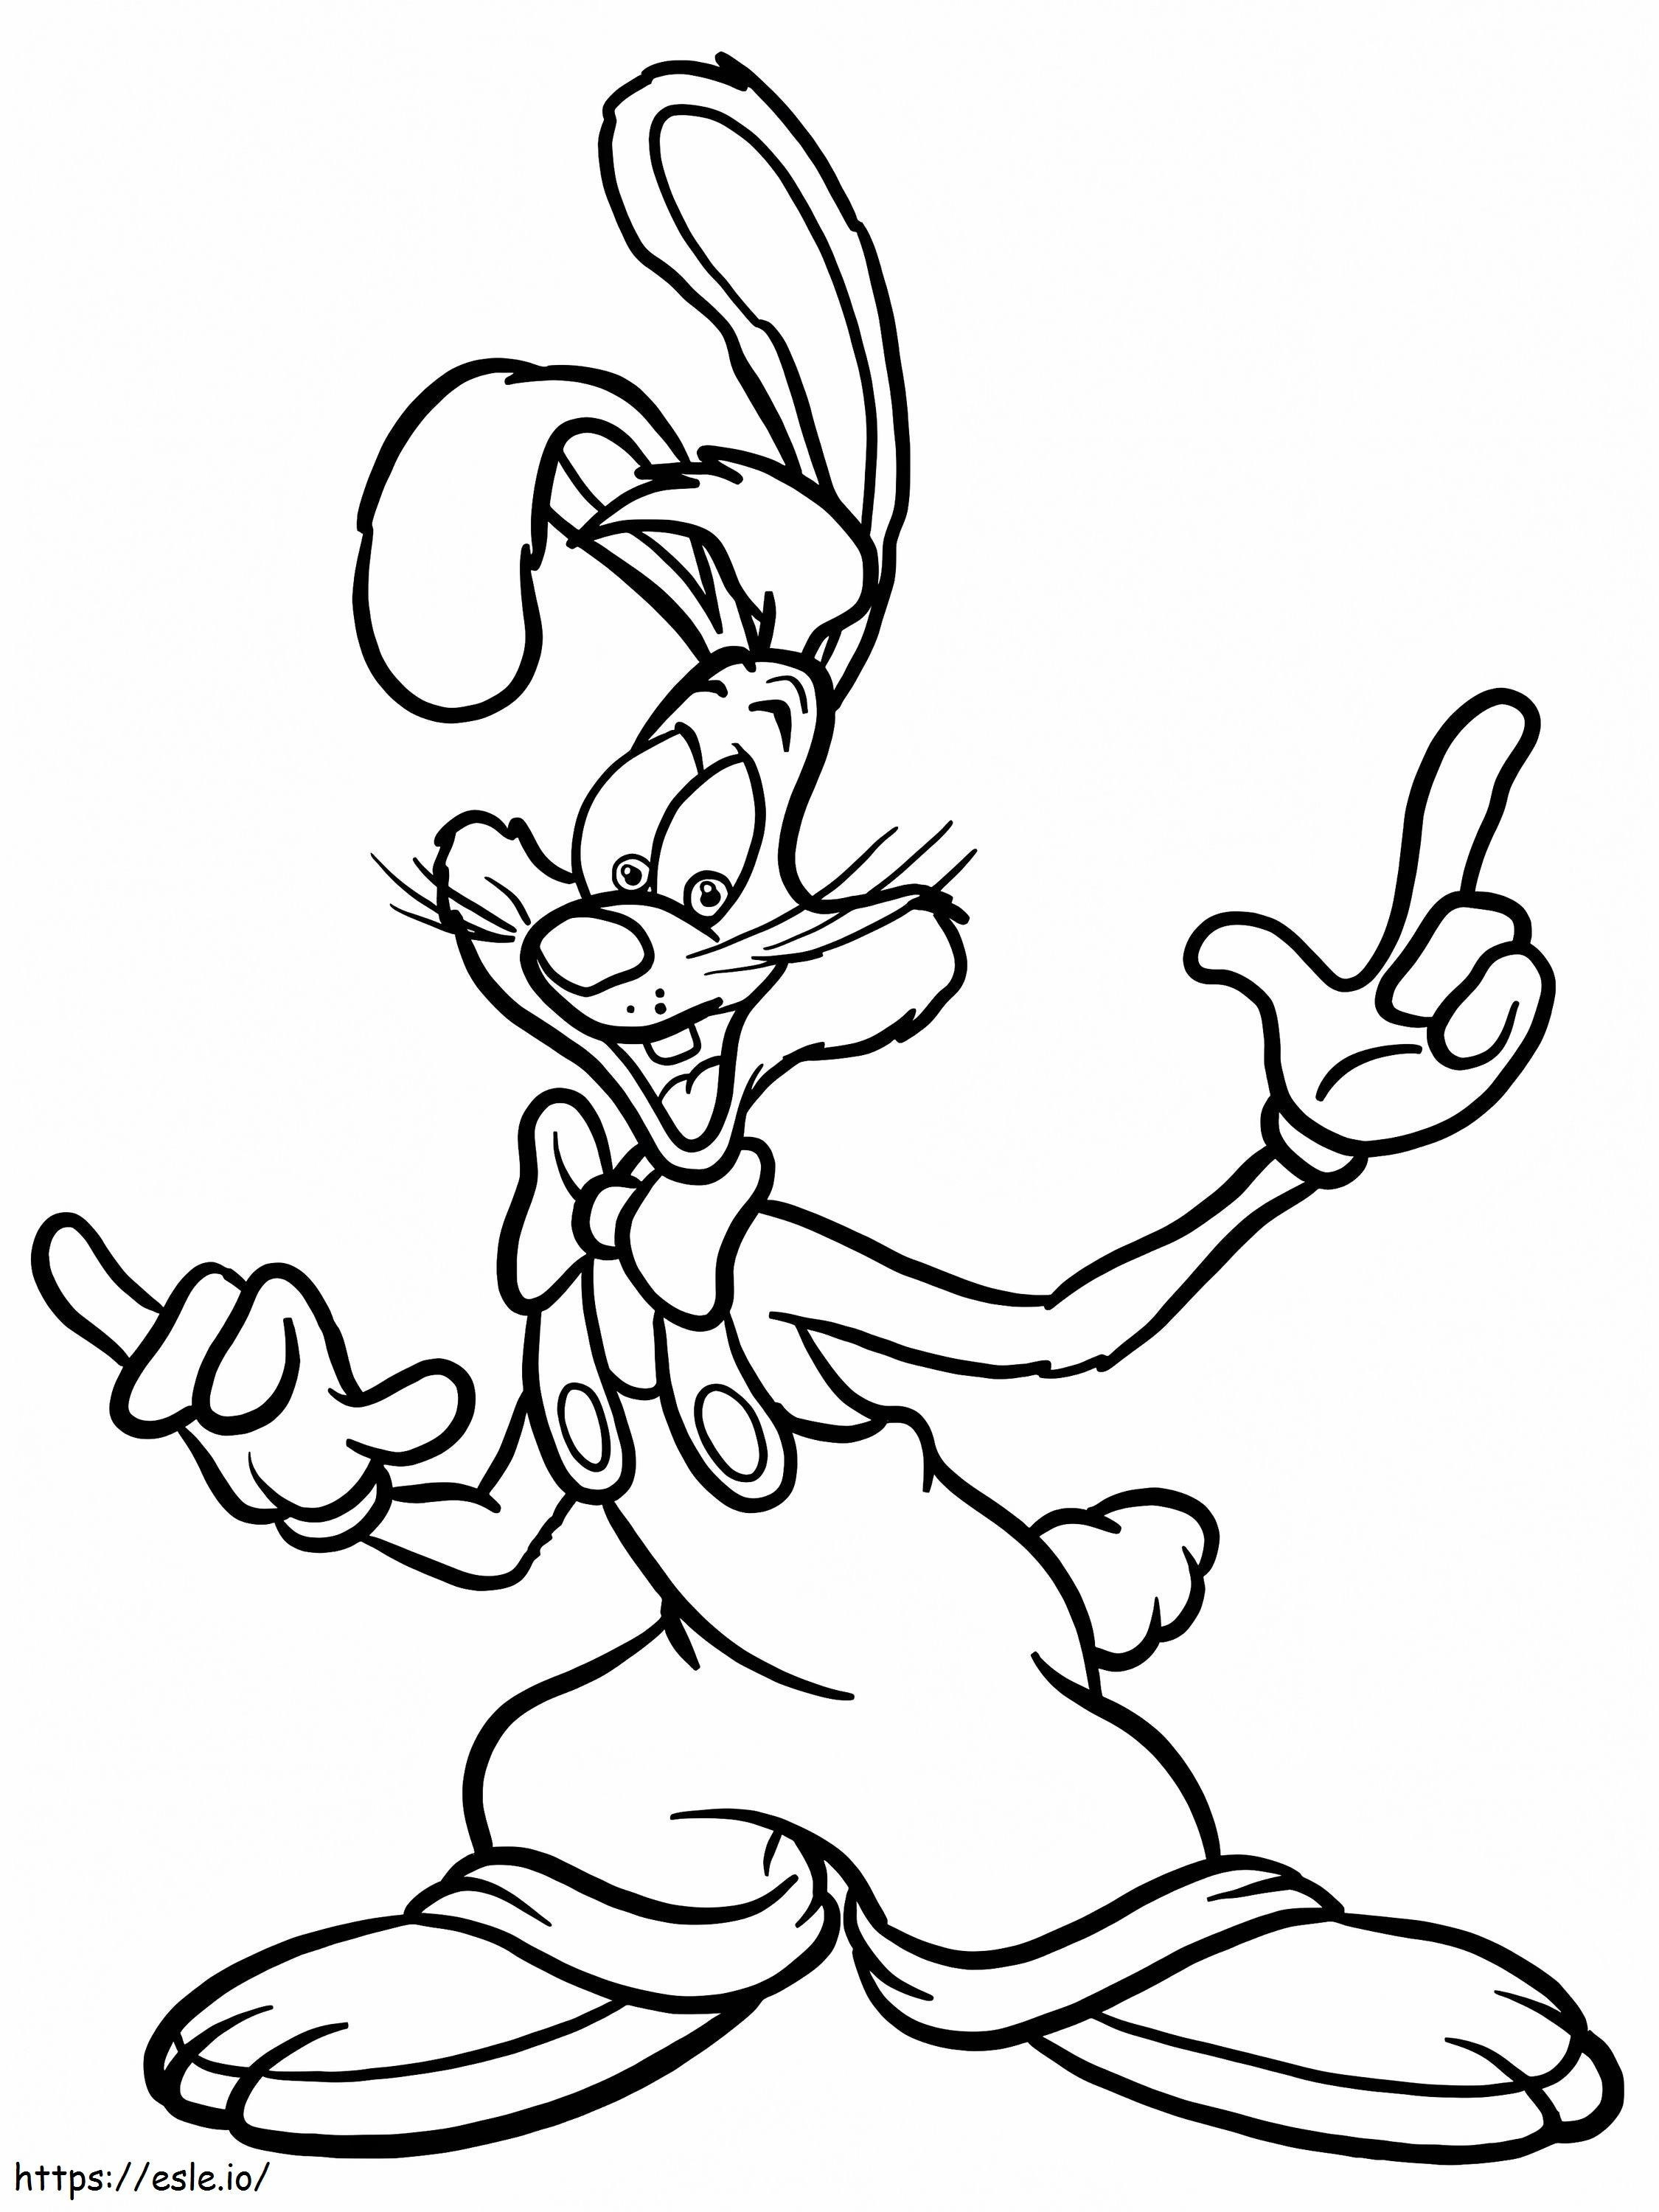 Print Roger Rabbit coloring page